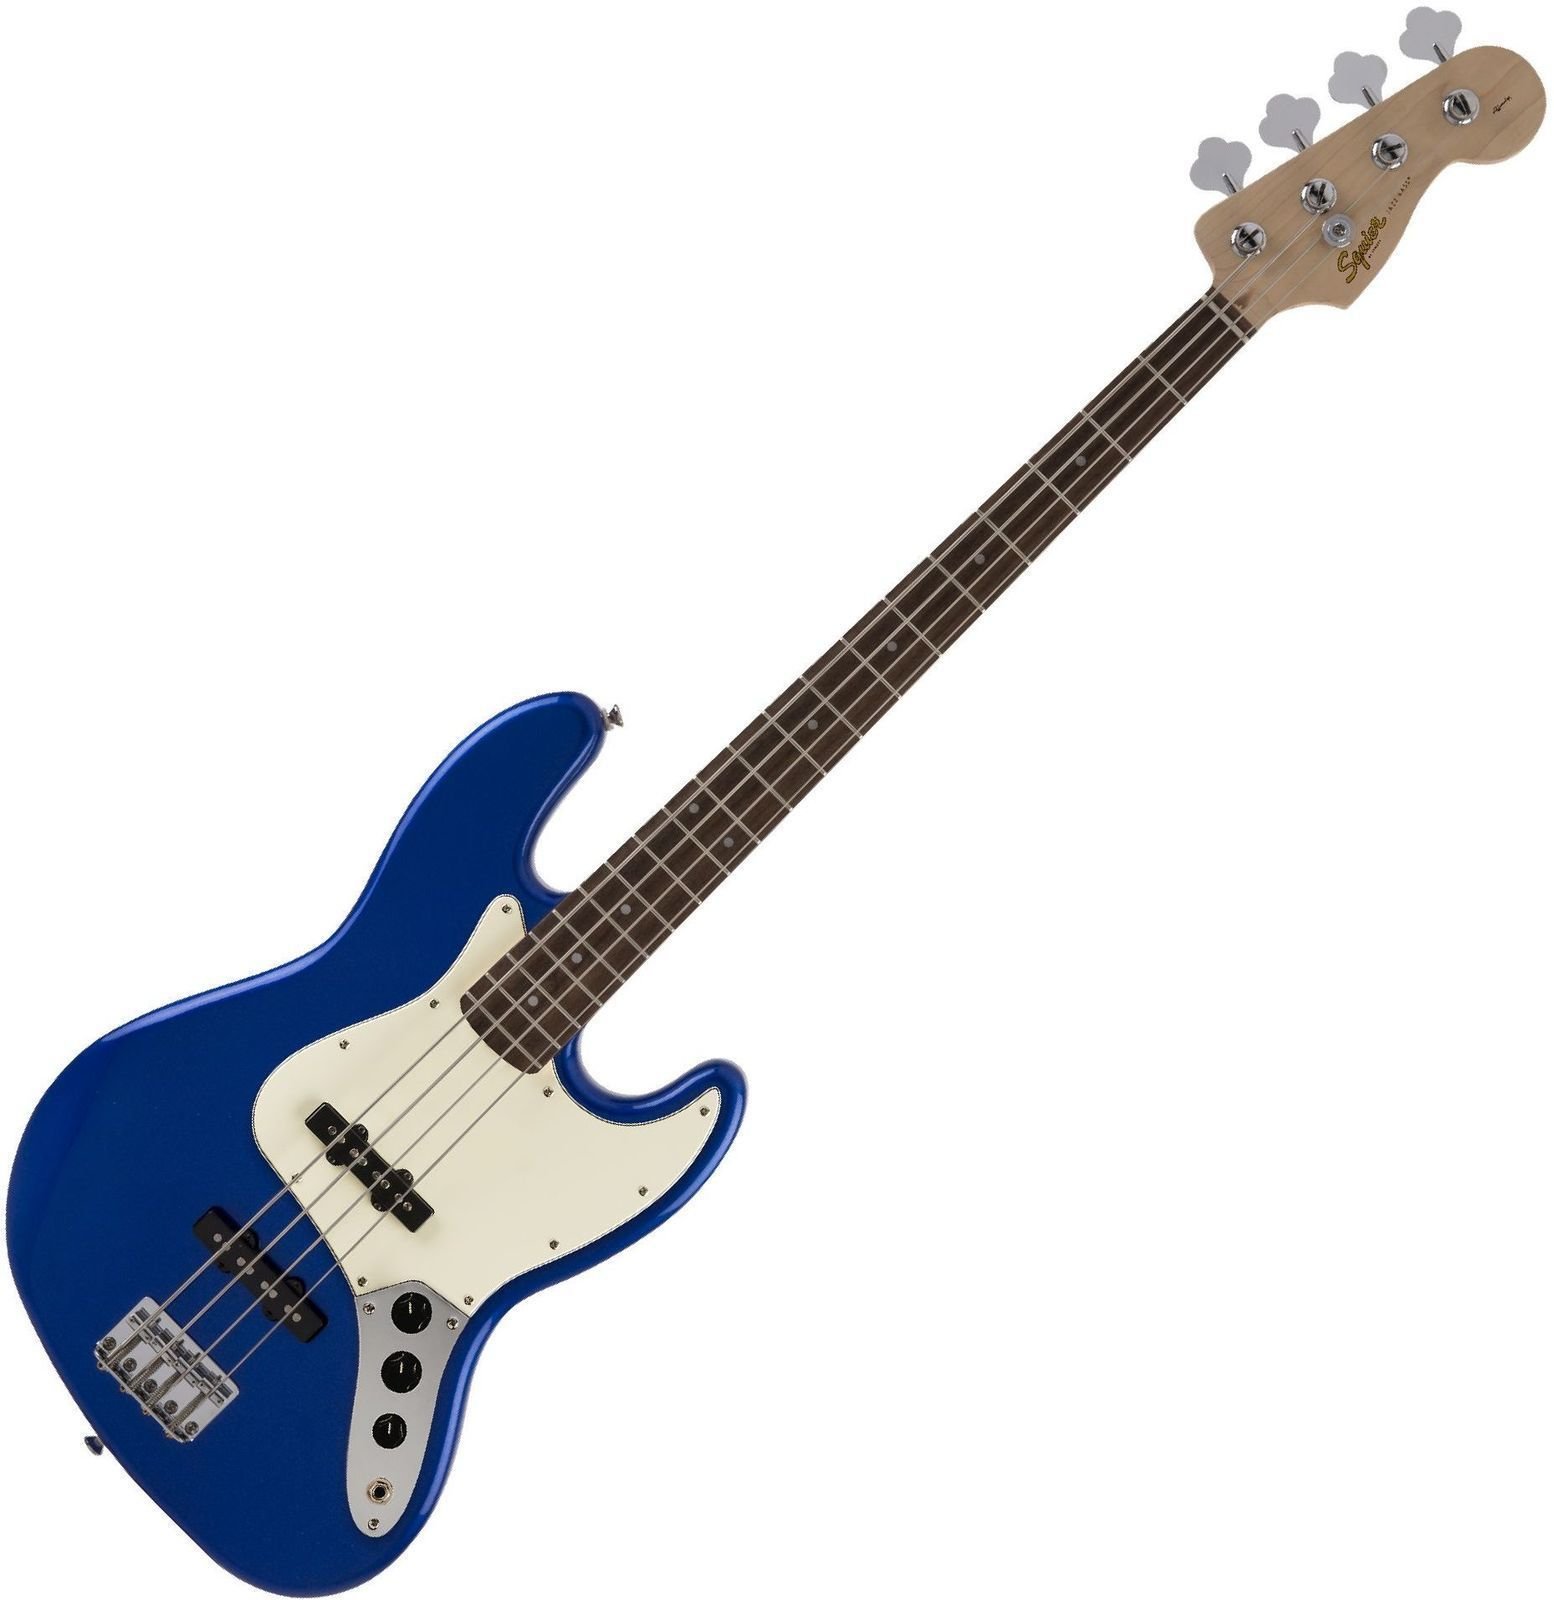 E-Bass Fender Squier Affinity Series Jazz Bass IL Imperial Blue